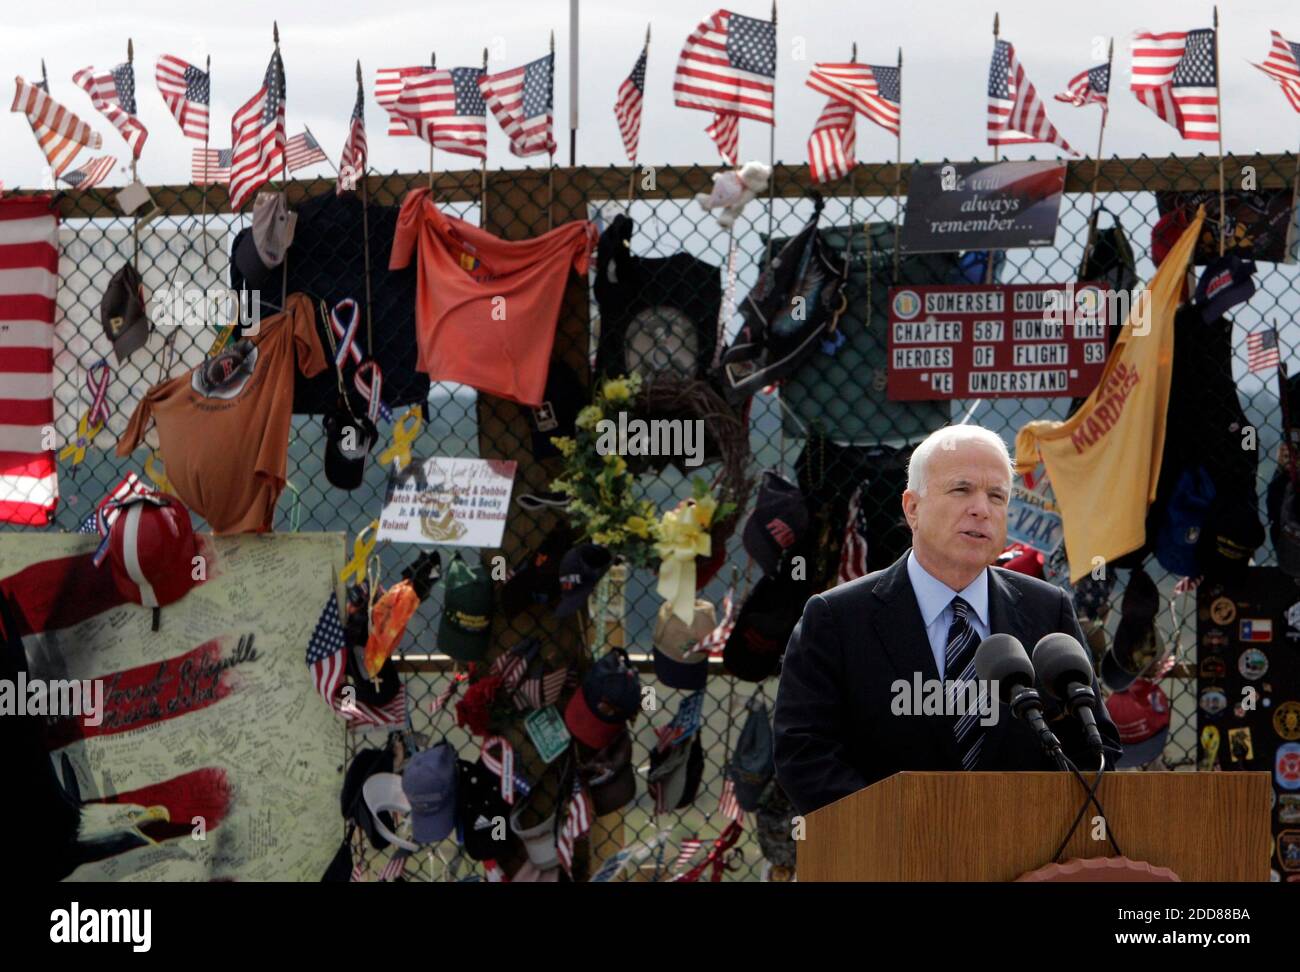 NO FILM, NO VIDEO, NO TV, NO DOCUMENTARY - Republican presidential candidate John McCain speaks at a ceremony for thos on Flight 93 during a ceremony in Shanksville, Pennsylvania, honoring those killed on September 2001, on Thursday September. 11, 2008. Photo by Laurence Kesterson/MCT/ABACAPRESS.COM Stock Photo